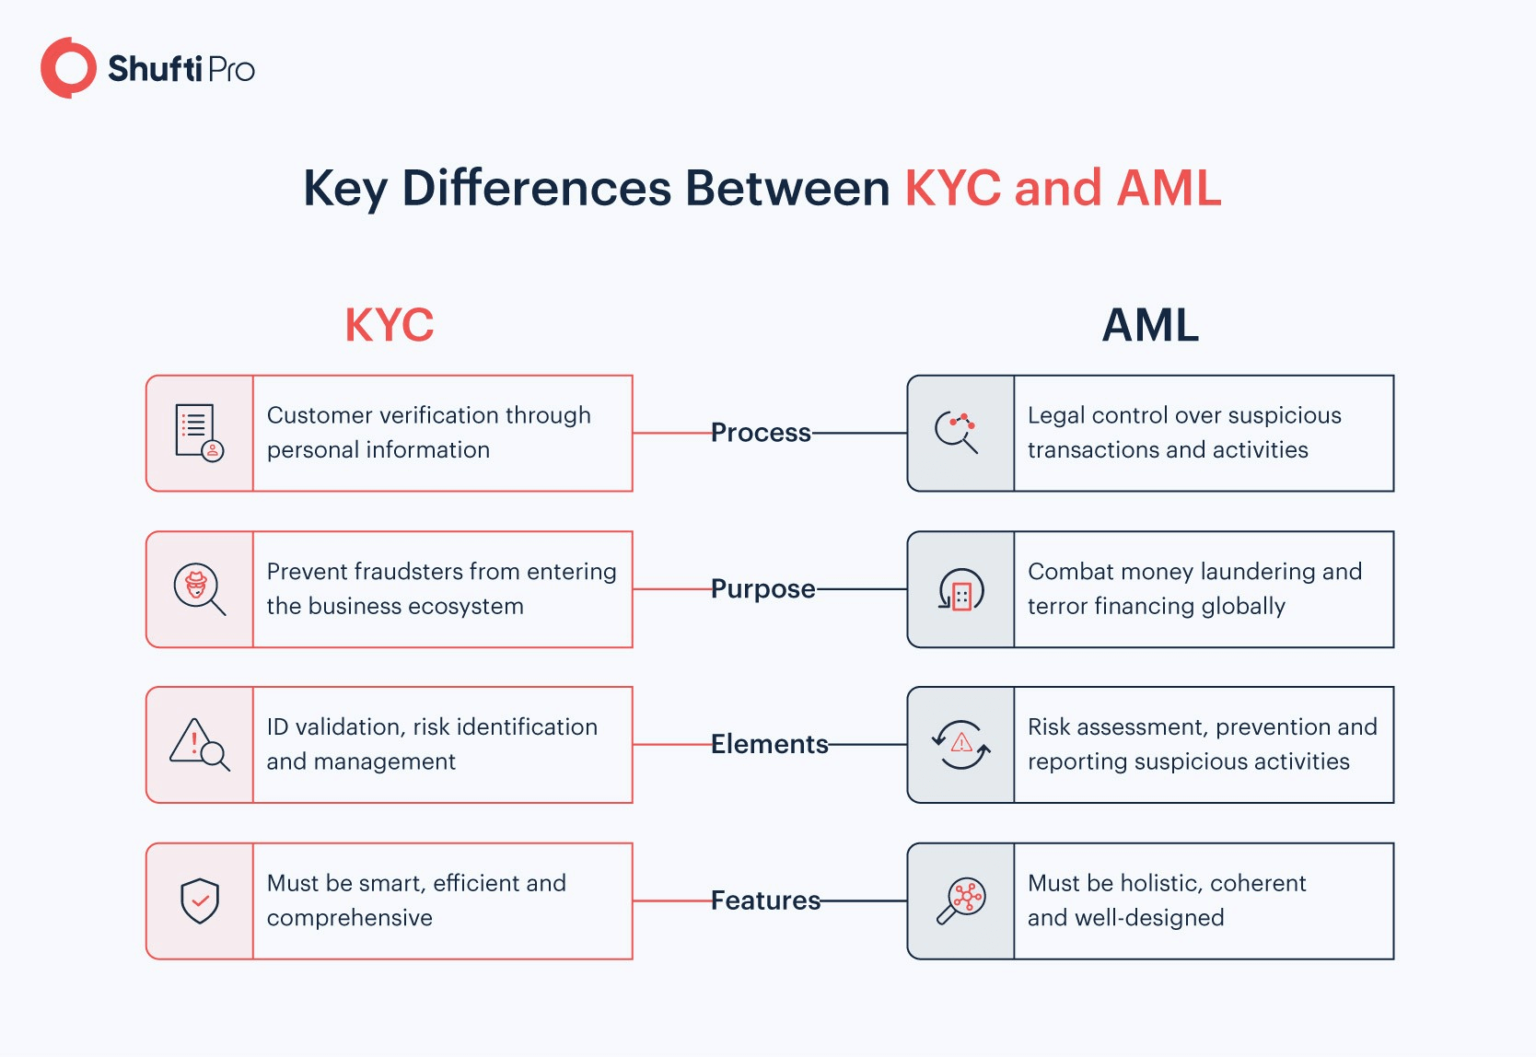 top-10-questions-about-aml-compliance-answered-by-the-cto-of-shufti-pro